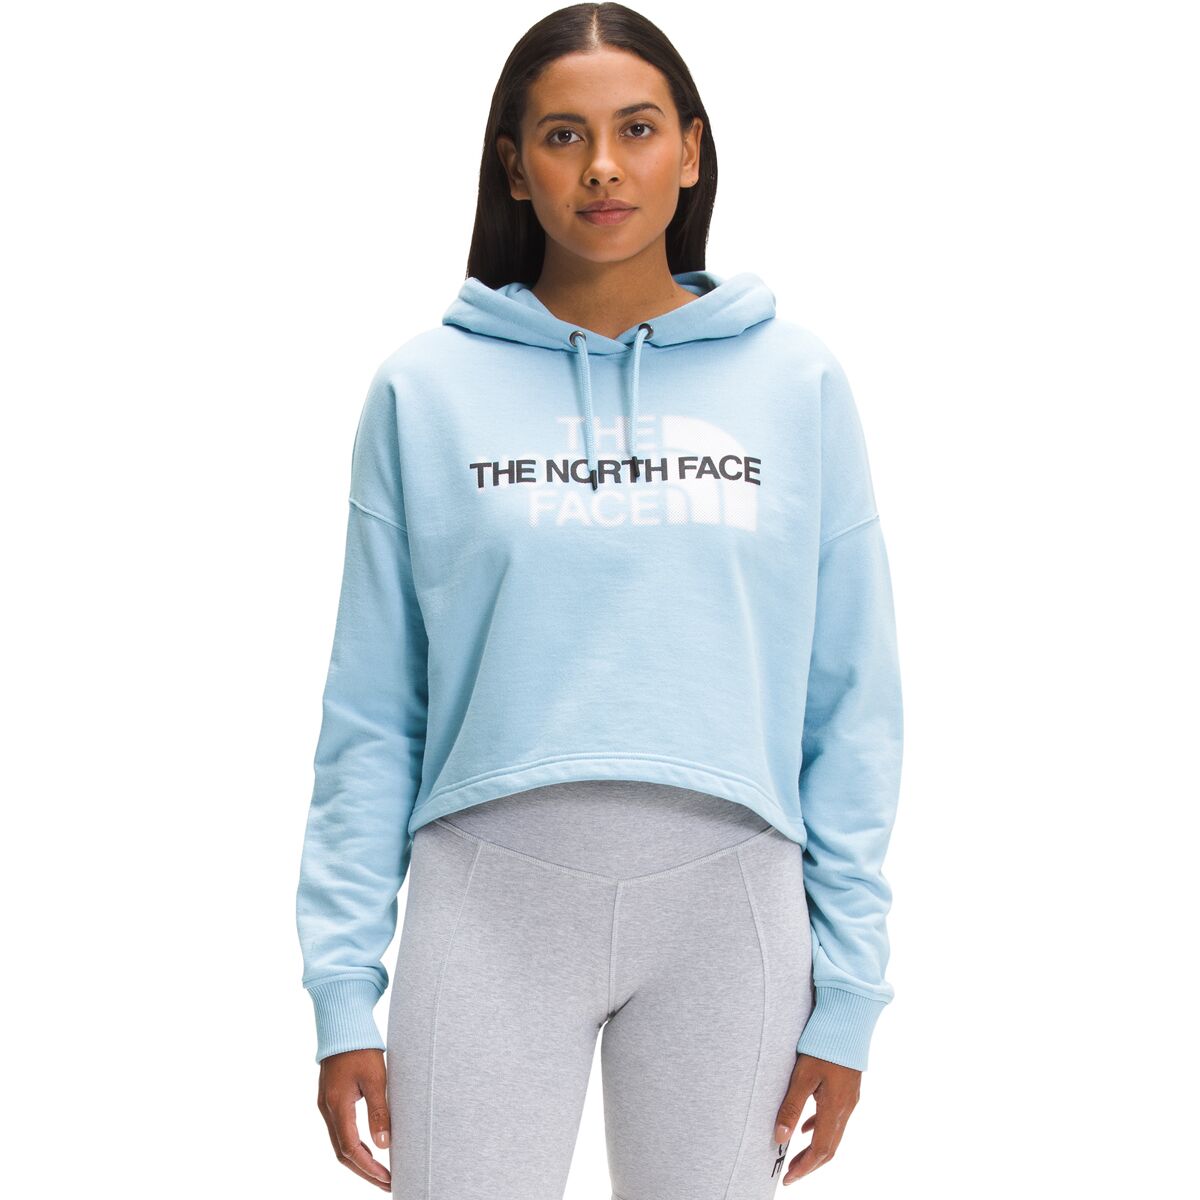 The North Face Coordinates Hoodie - Women's